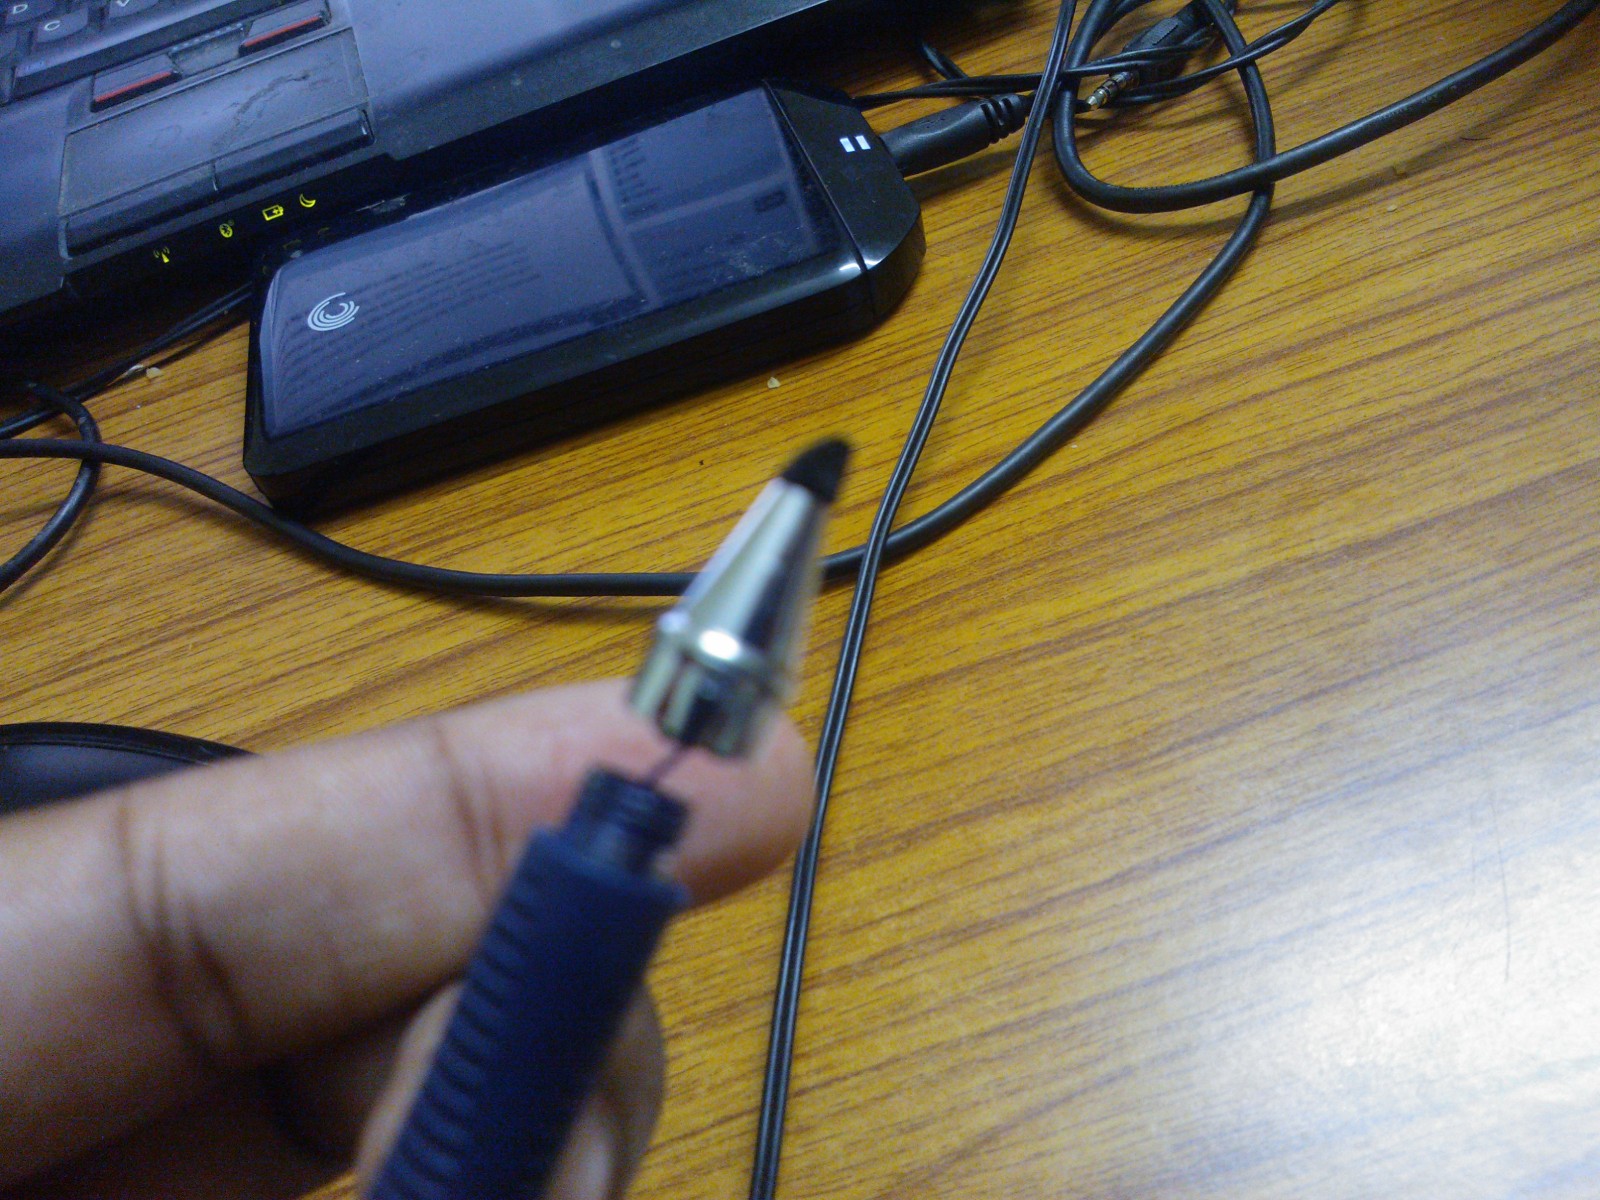 Electrical connection between wire and the foam is a must for the stylus to function correctly